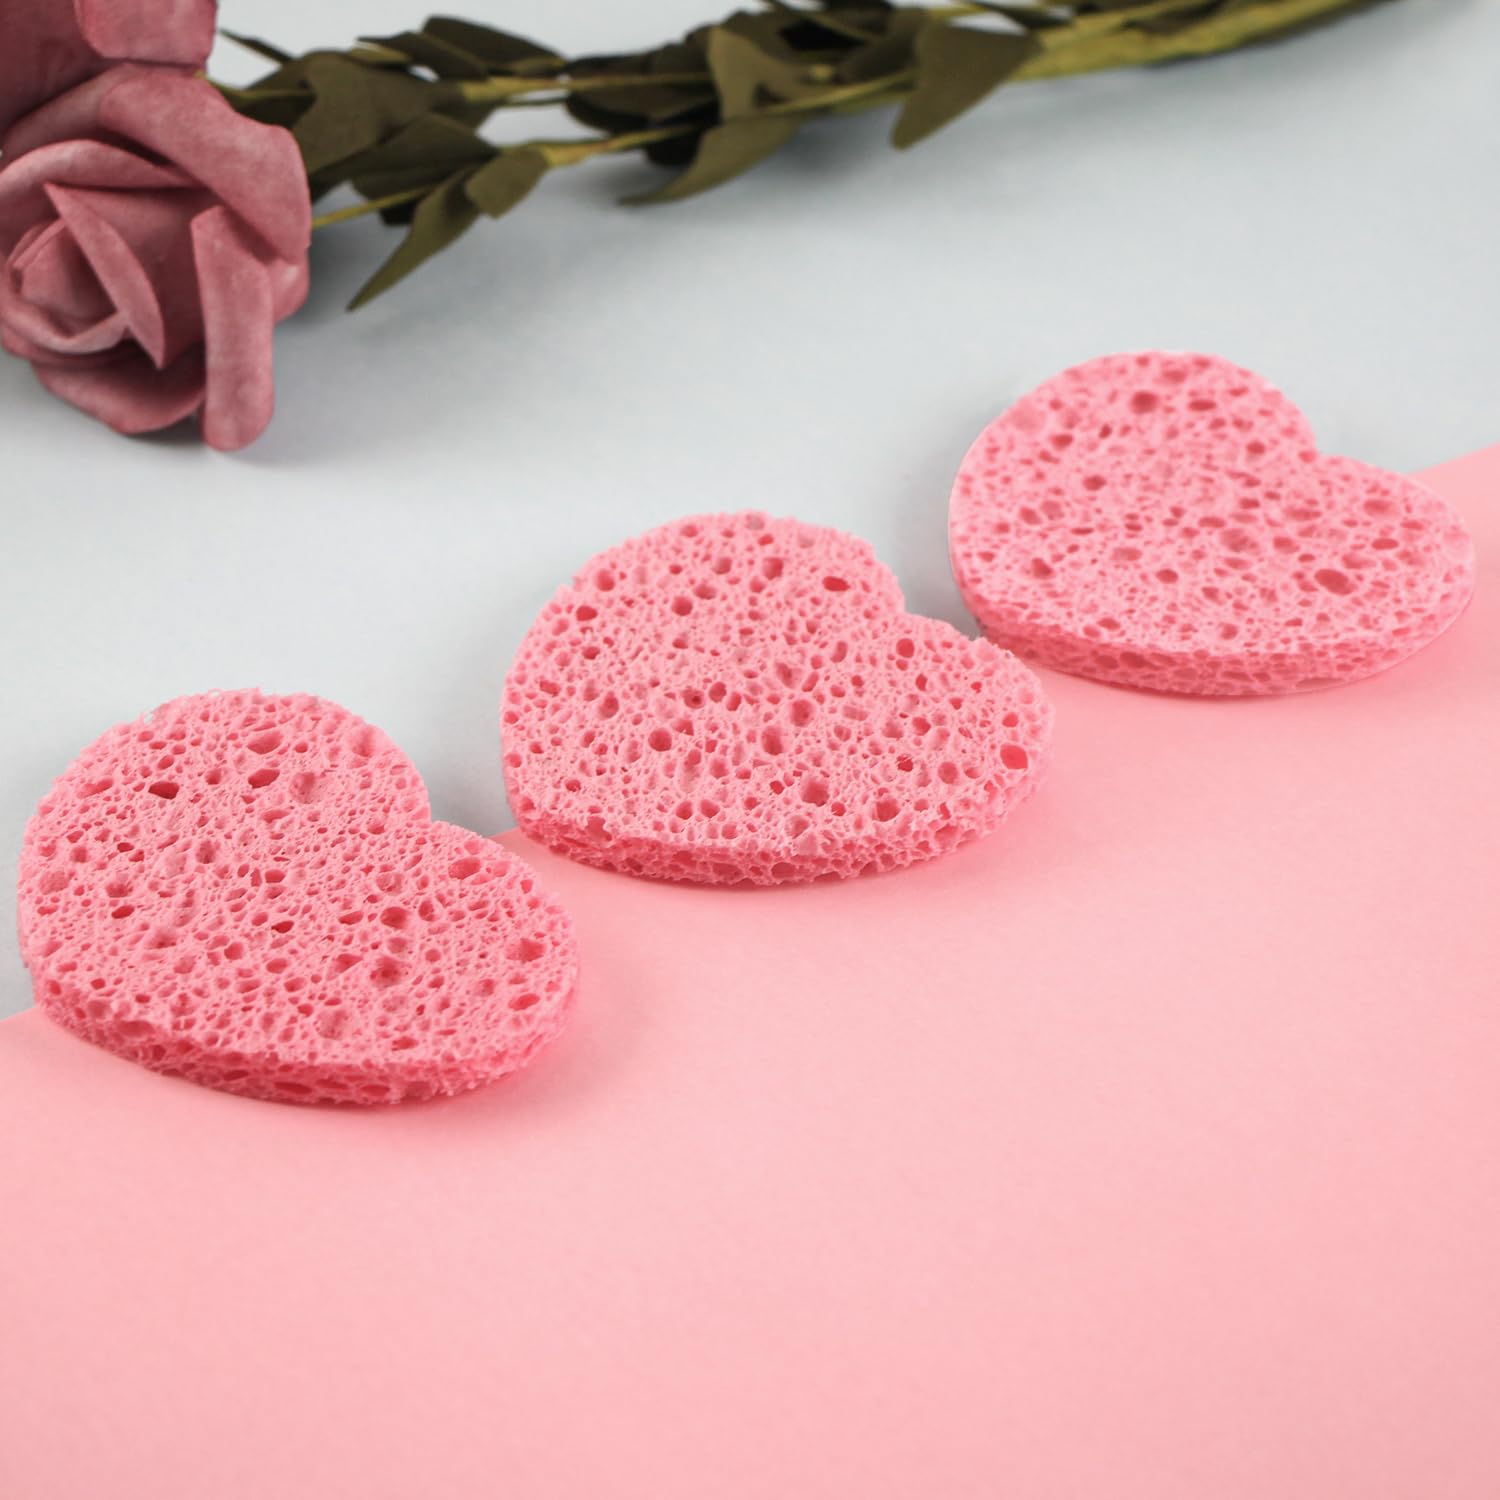 60-Count Compressed Facial Sponges with Container, Heart Shape Compressed Face Sponge, 100% Natural Sponge Pads for Face Cleansing, Massage, Pore Exfoliating Mask, Makeup Removal (Pink)